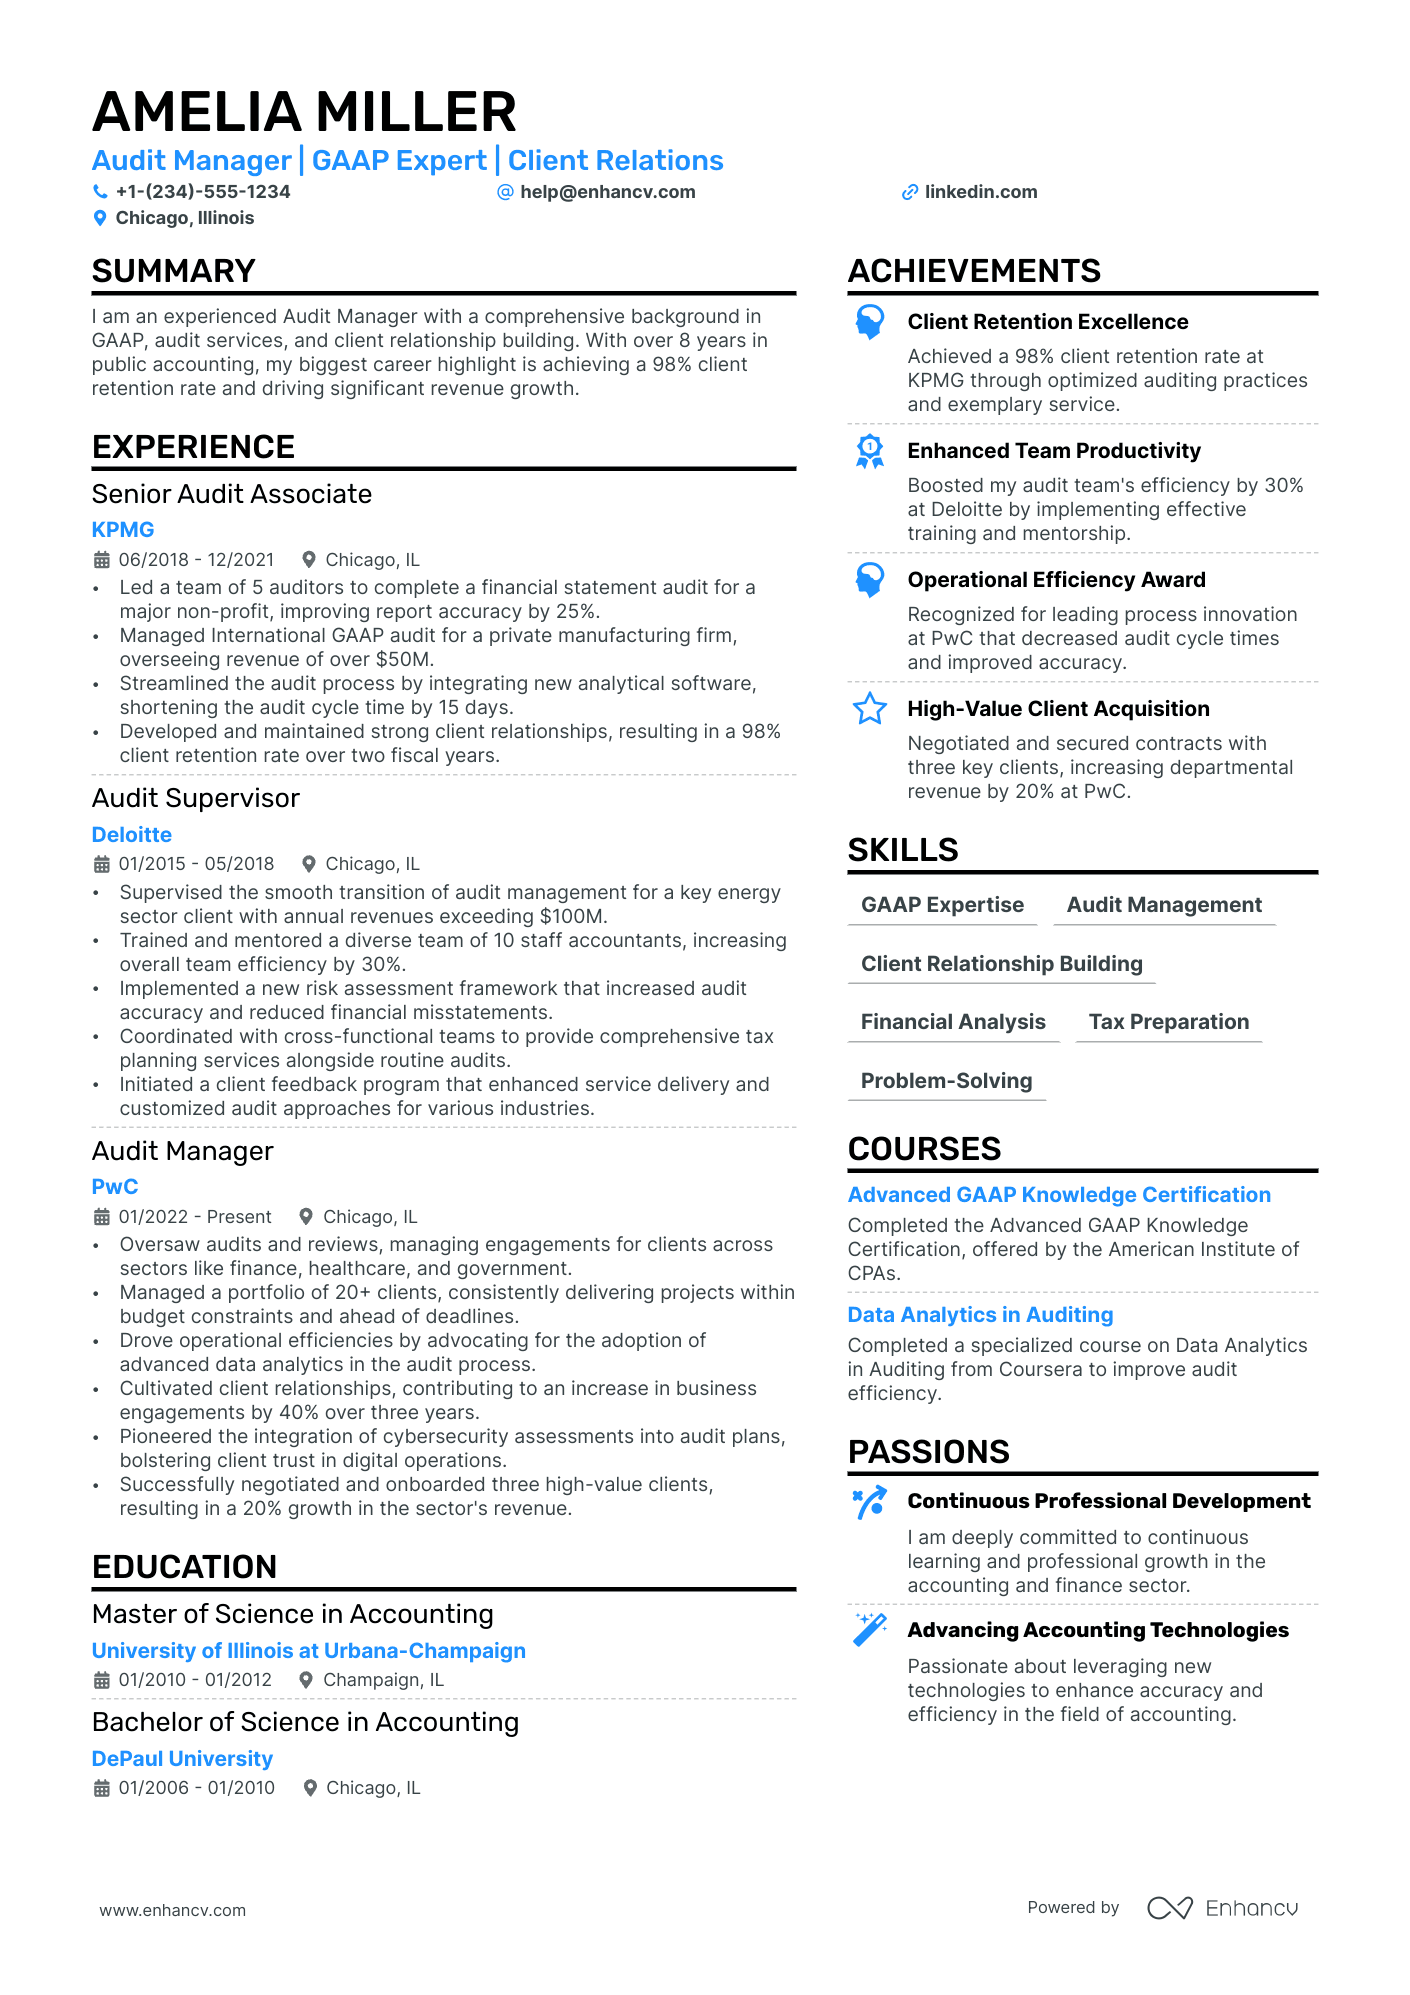 Audit Manager resume example